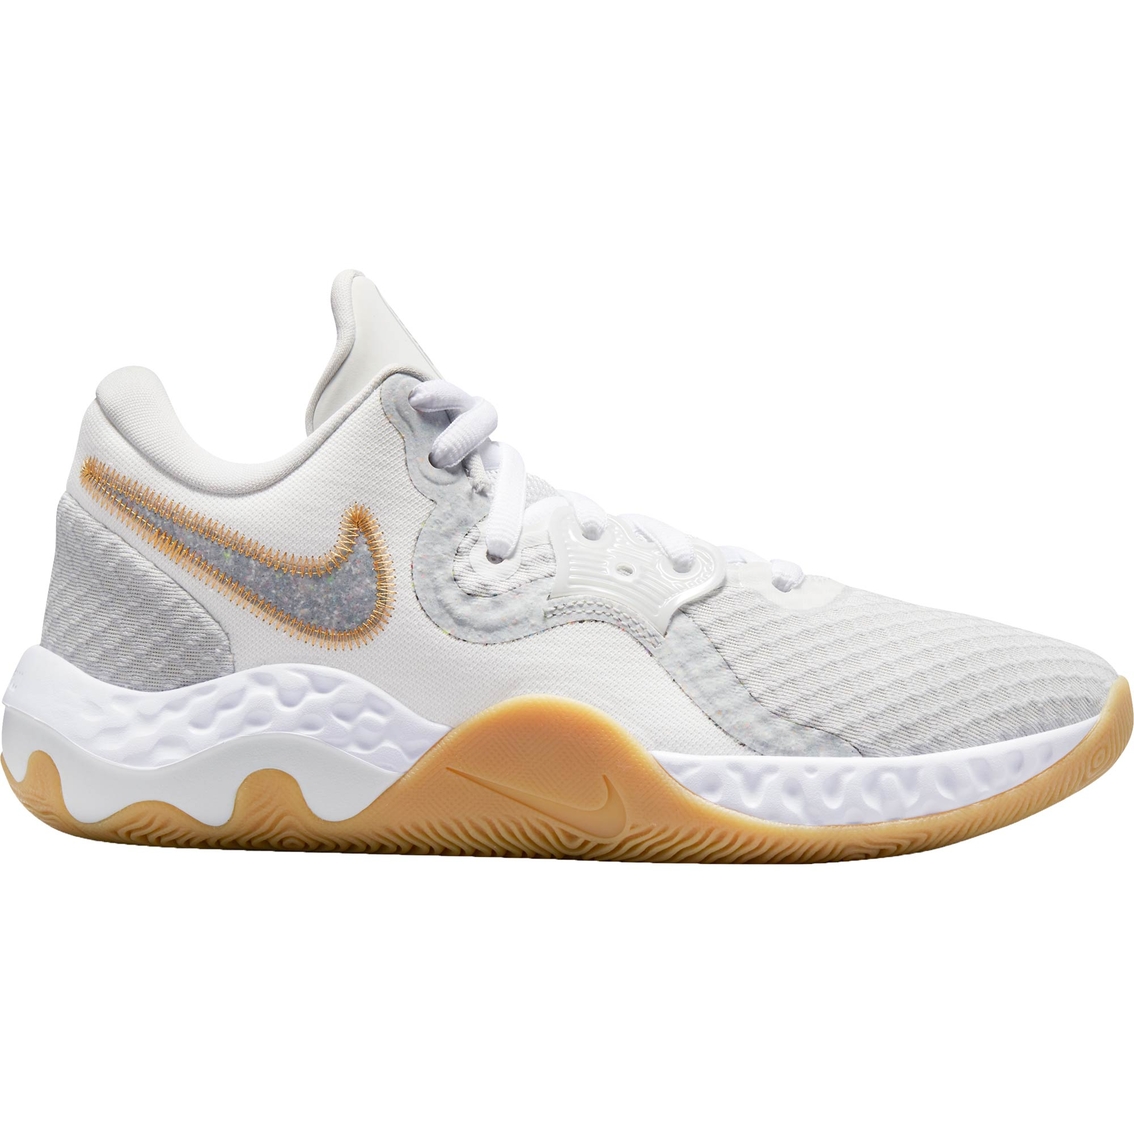 Nike Men's Renew Elevate 2 Basketball Shoes | Men's Athletic Shoes ...